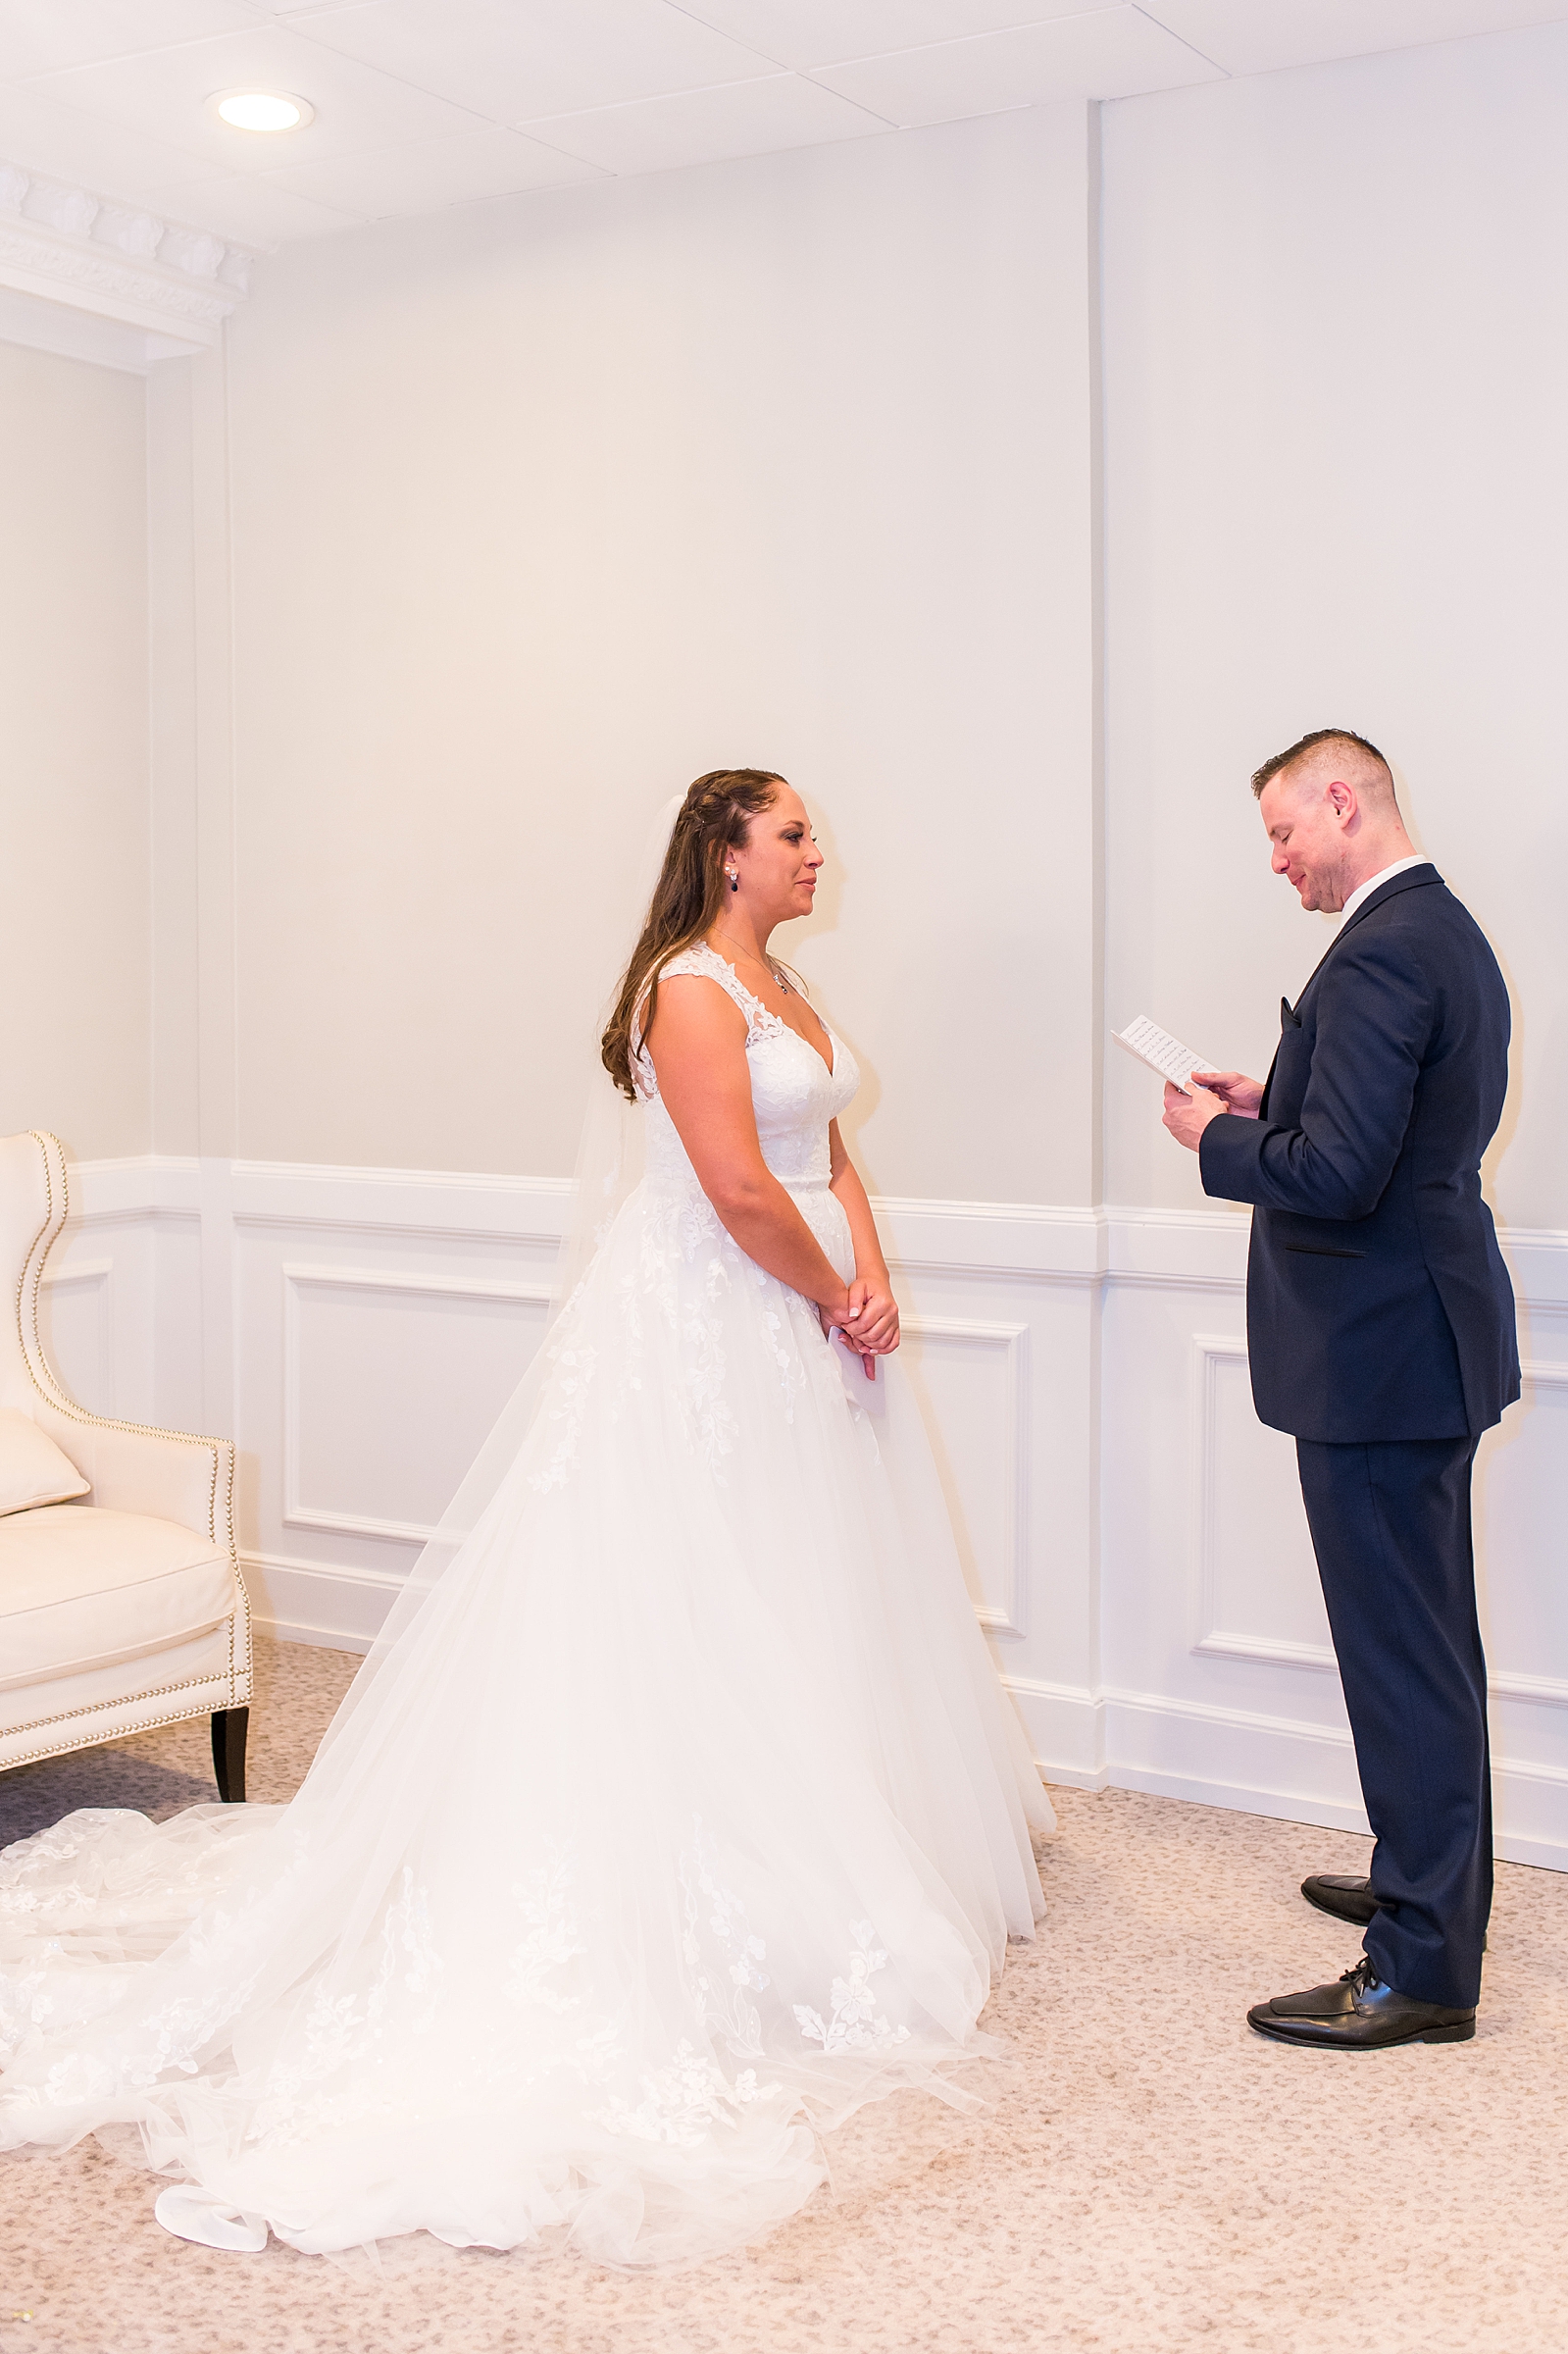 bride and groom exchange vows privately at intimate winter wedding